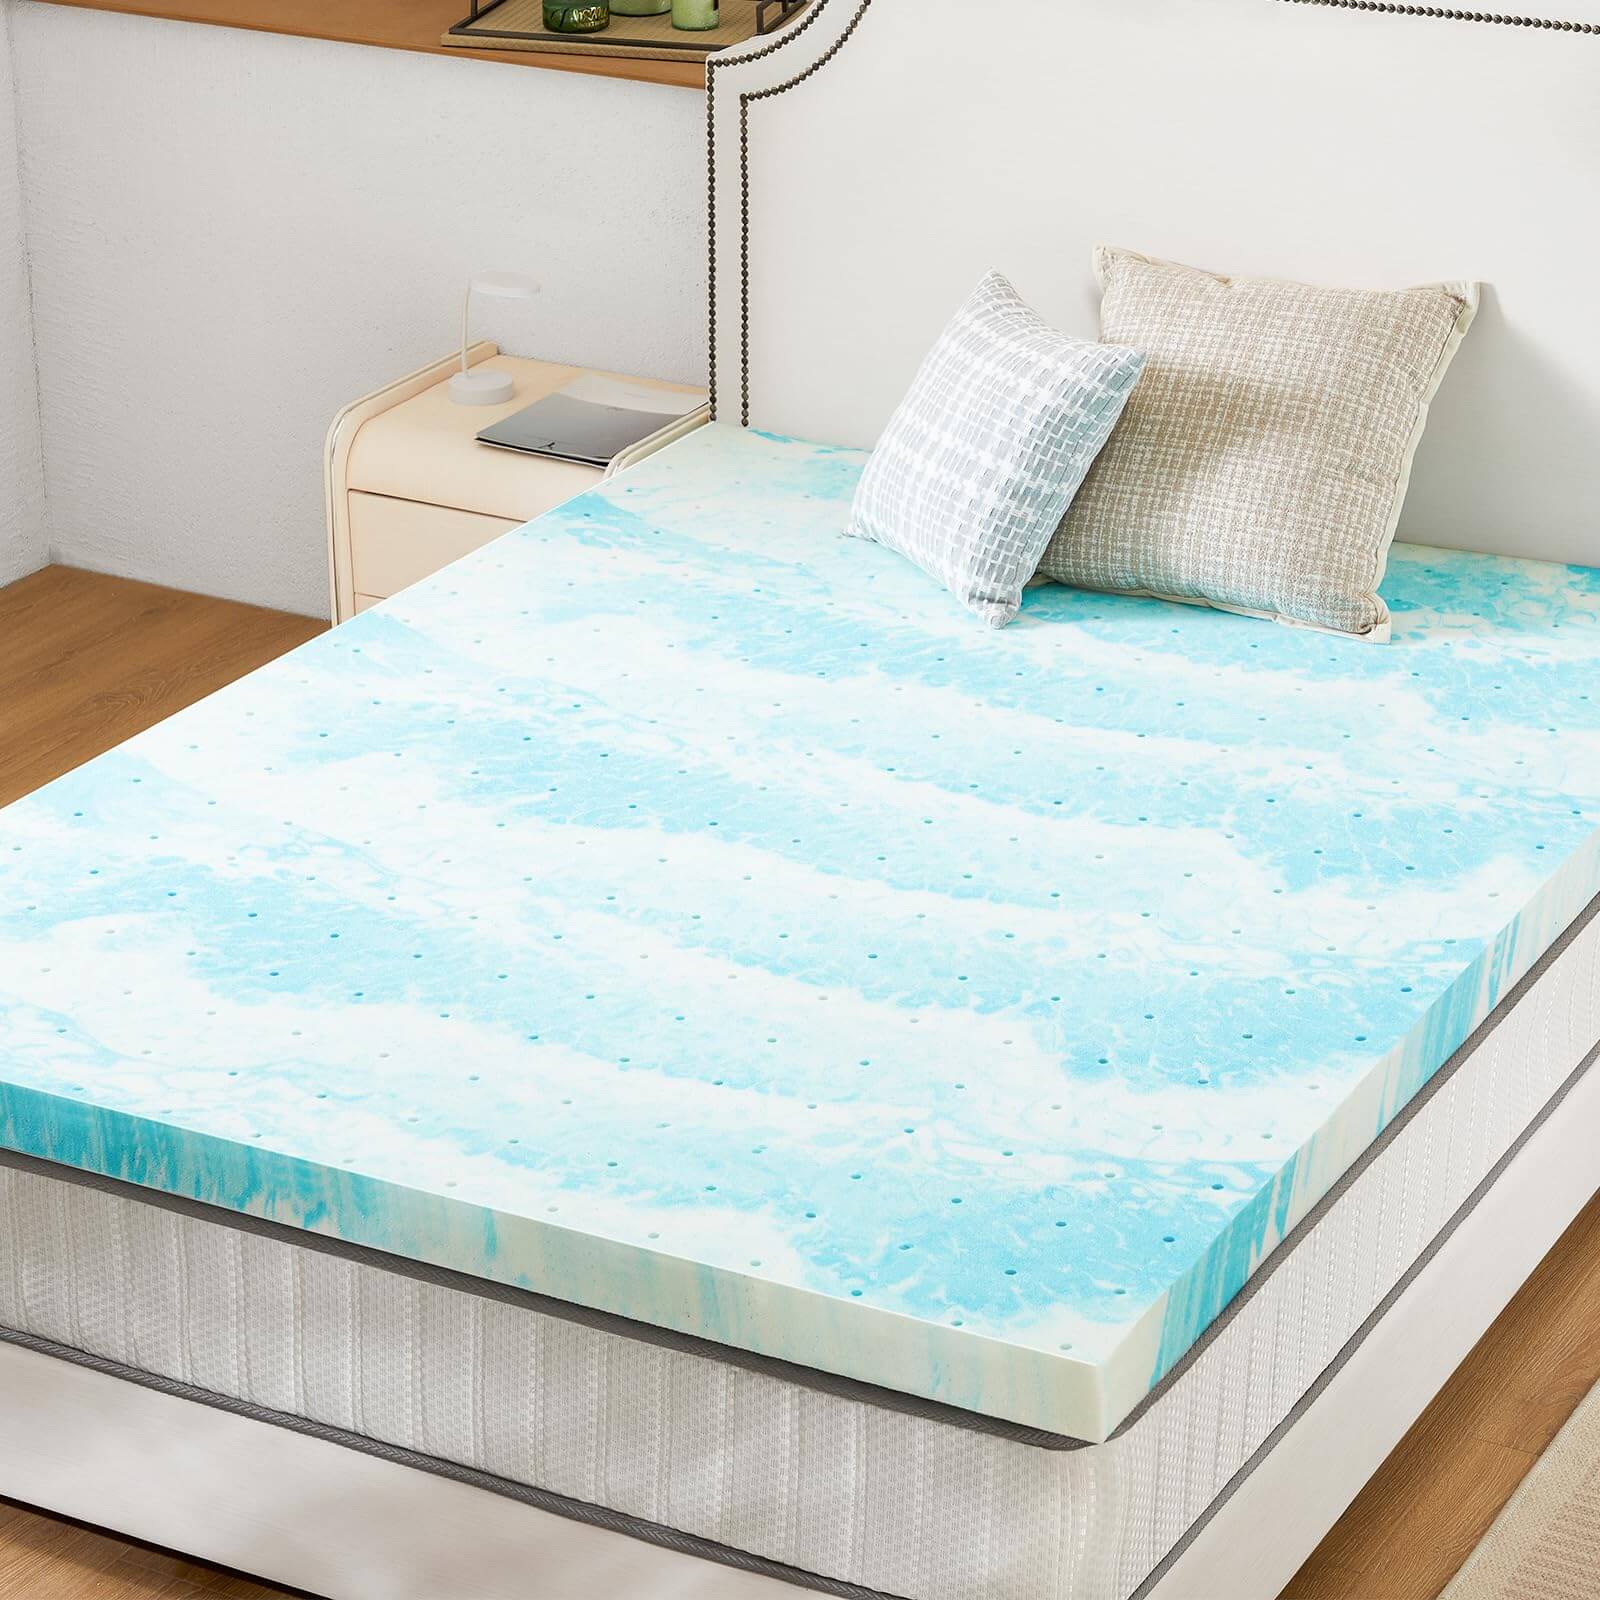 memory-foam-bed-topper#Style_2 Inches#Size_Full